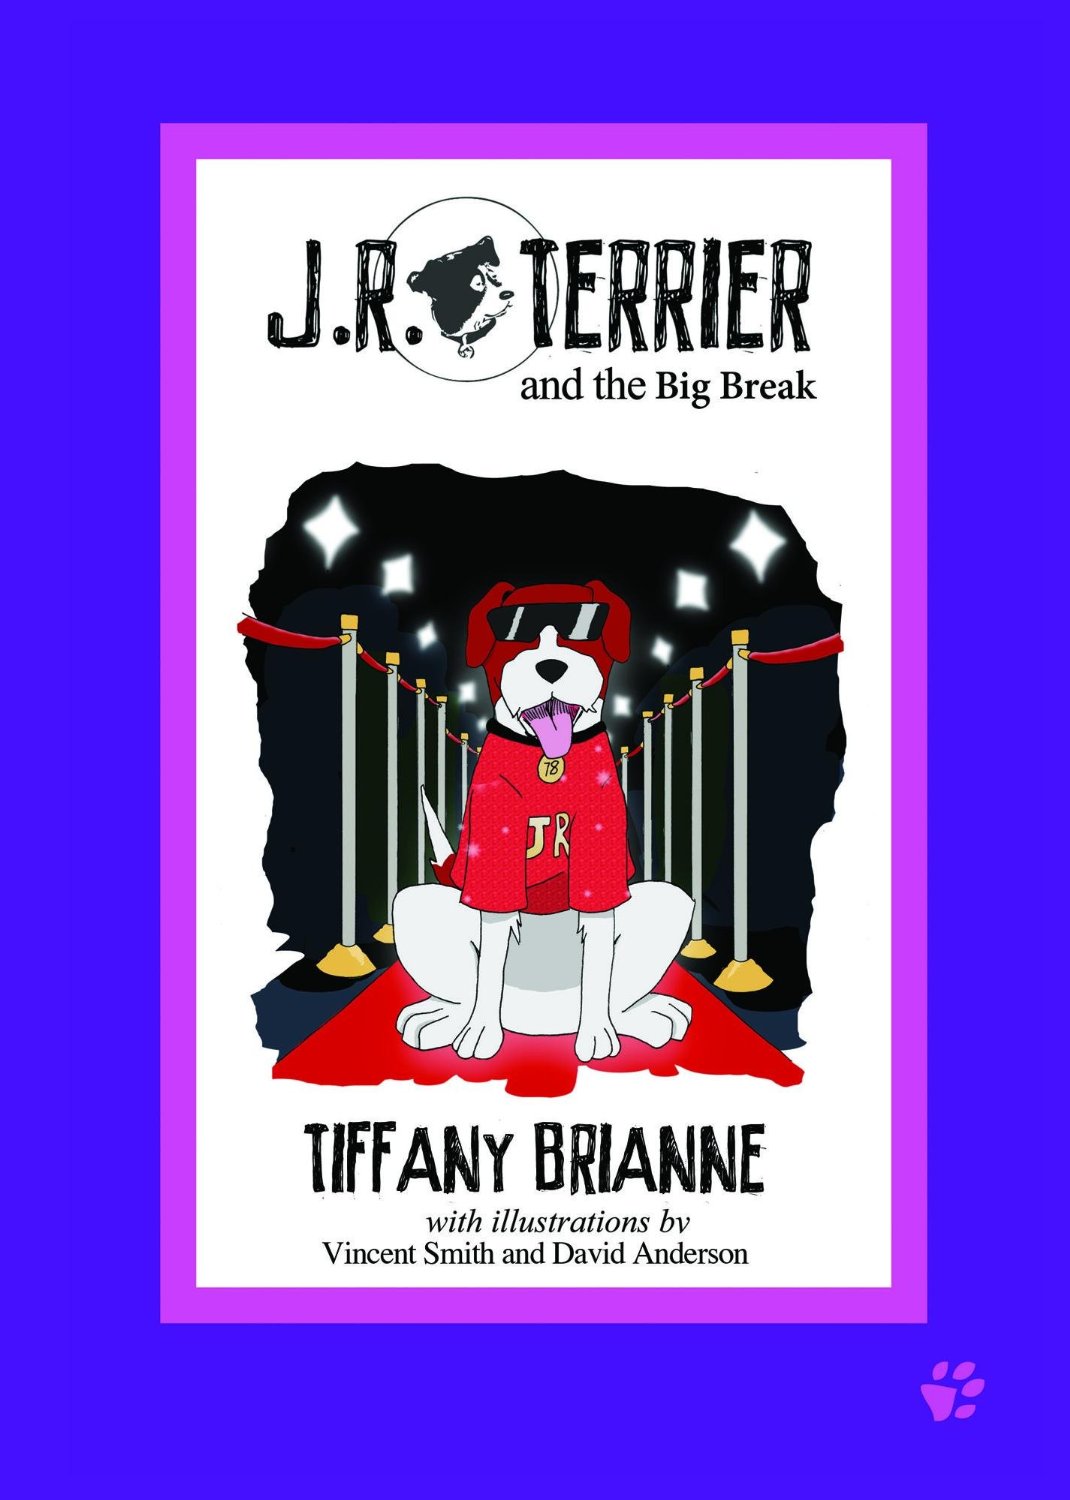 JR Terrier and the Big Break by Tiffany Brianne